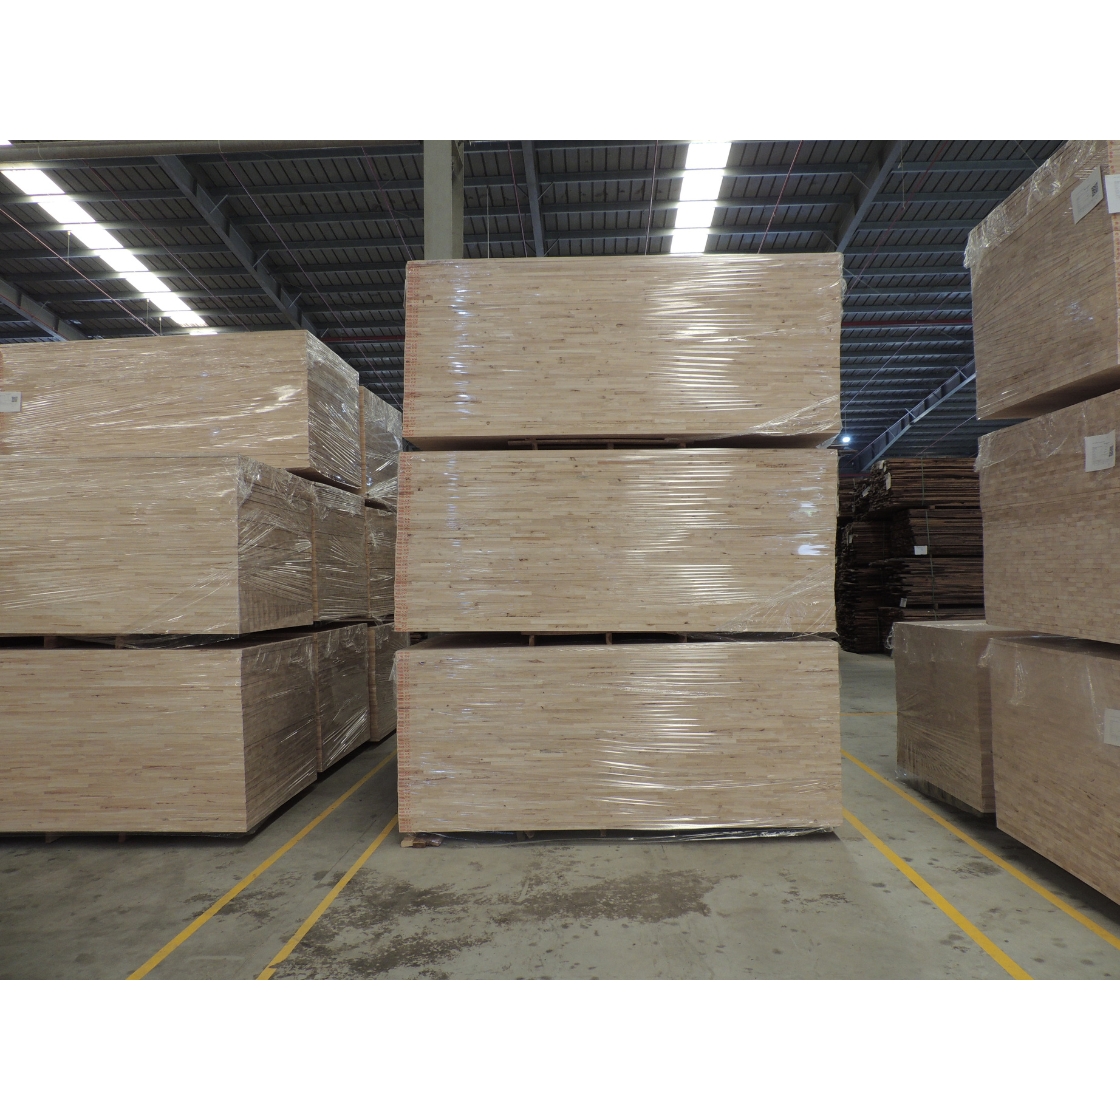 Rubber Wood Material Durable Export Cabinet Doors Frame And Components Fsc-Coc Plastic Bag Made In Vietnam Manufacturer 4